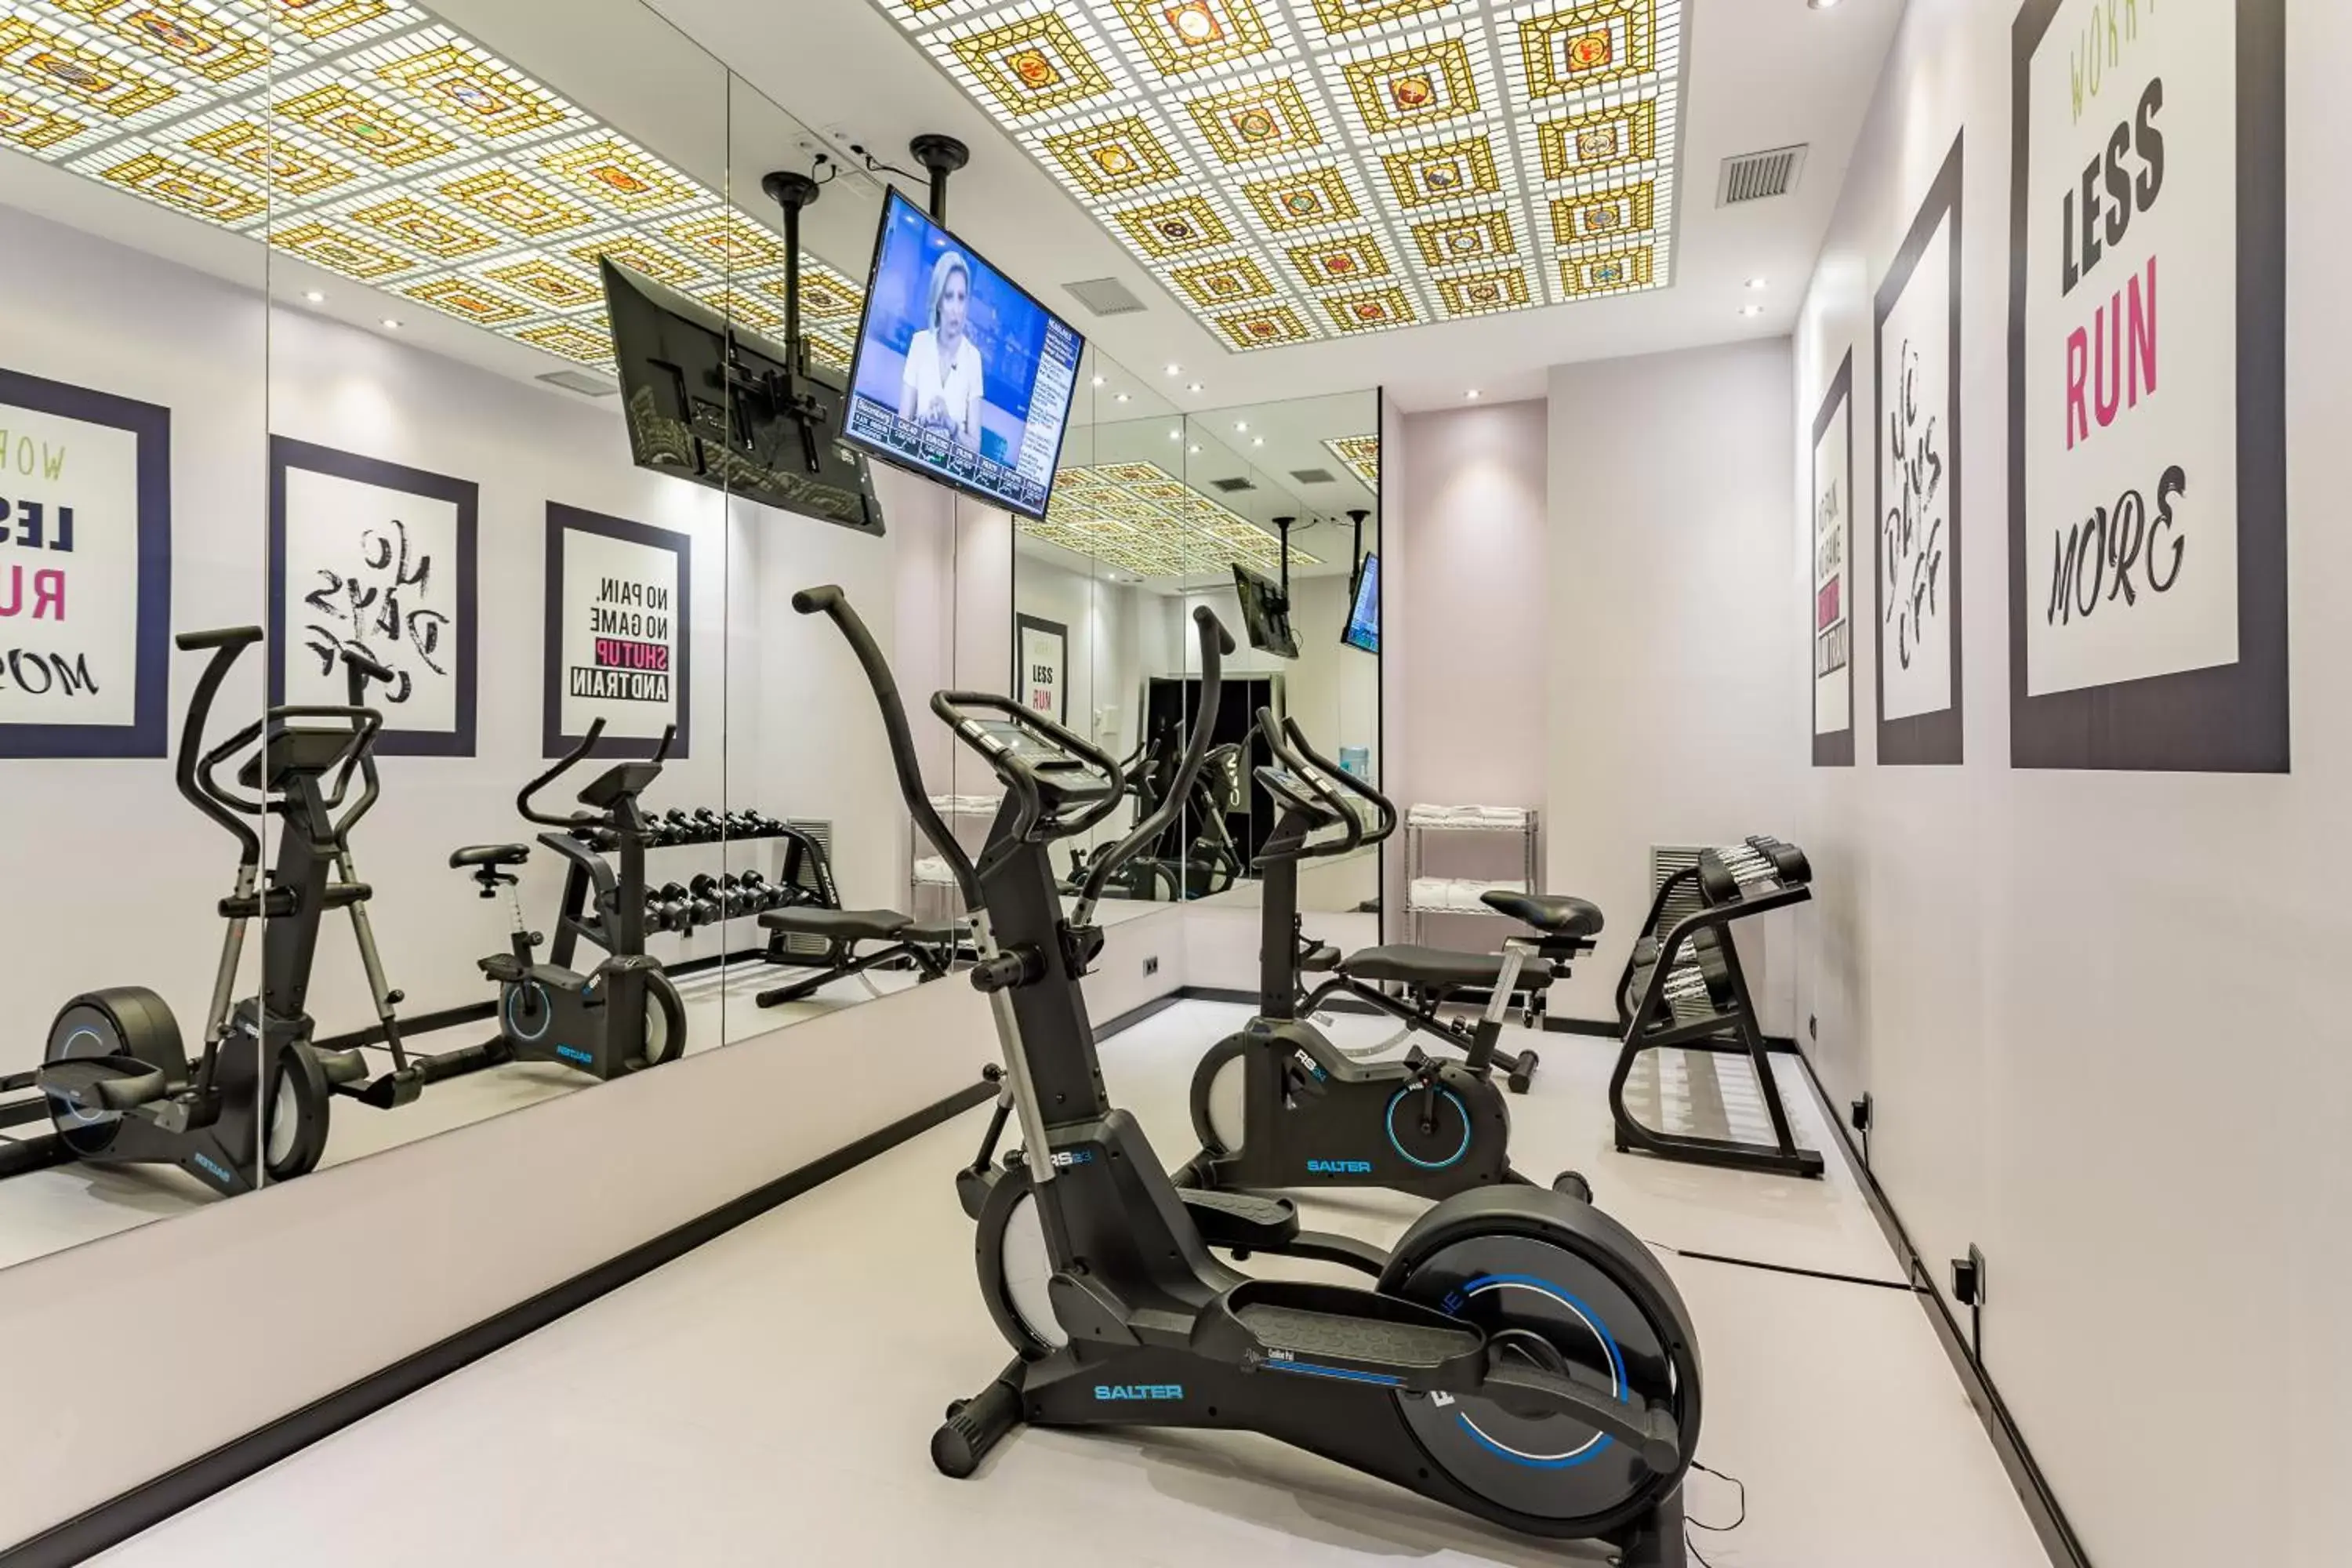 Fitness Center/Facilities in Room Mate Carla